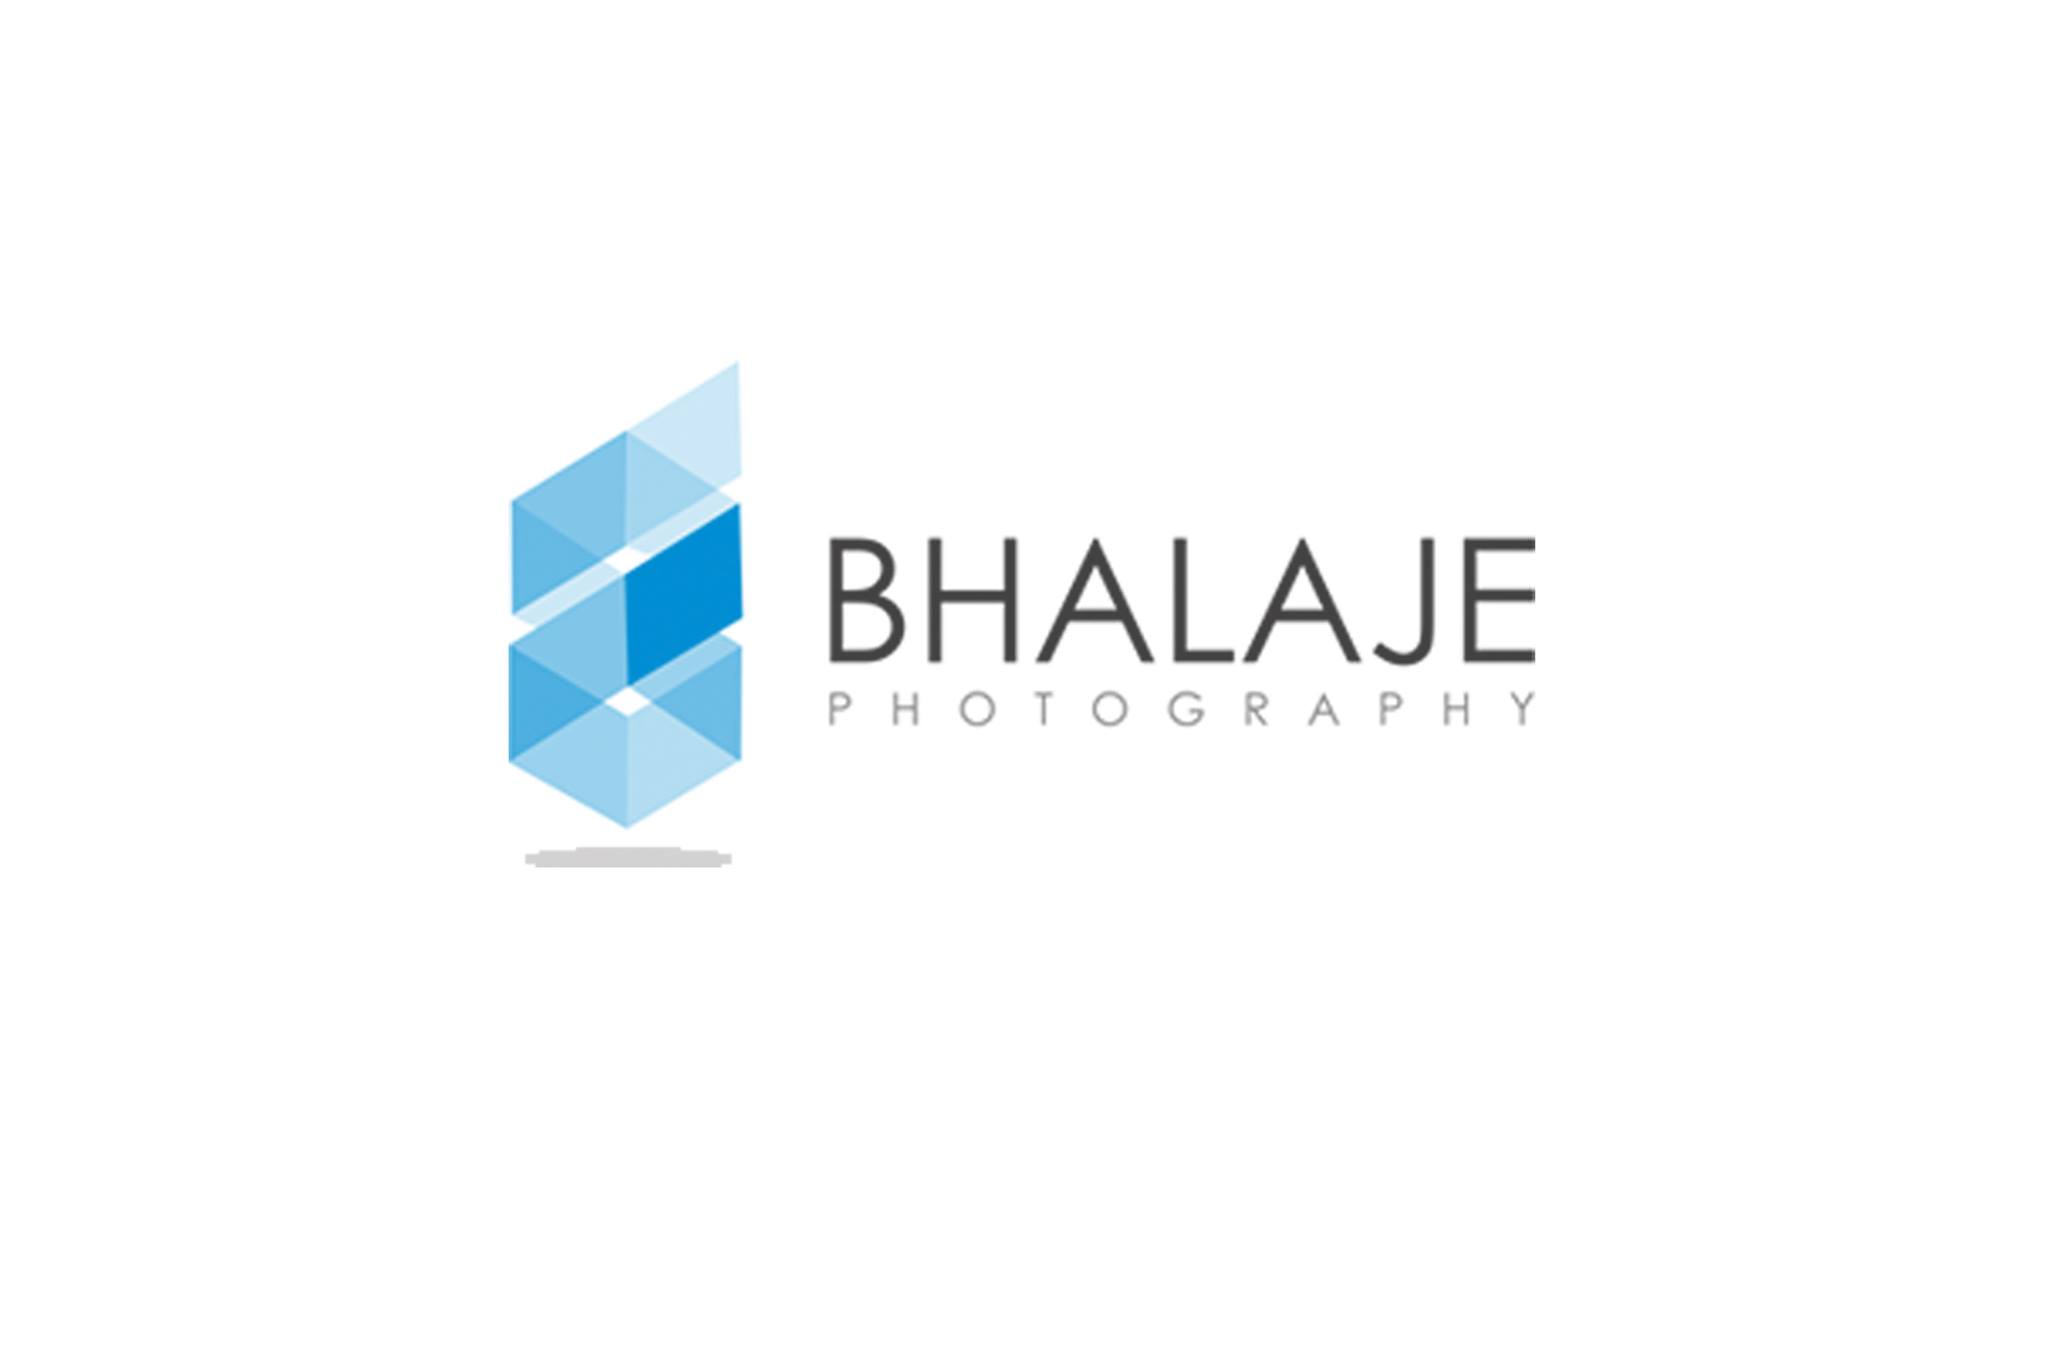 Bhalaje Photography|Catering Services|Event Services